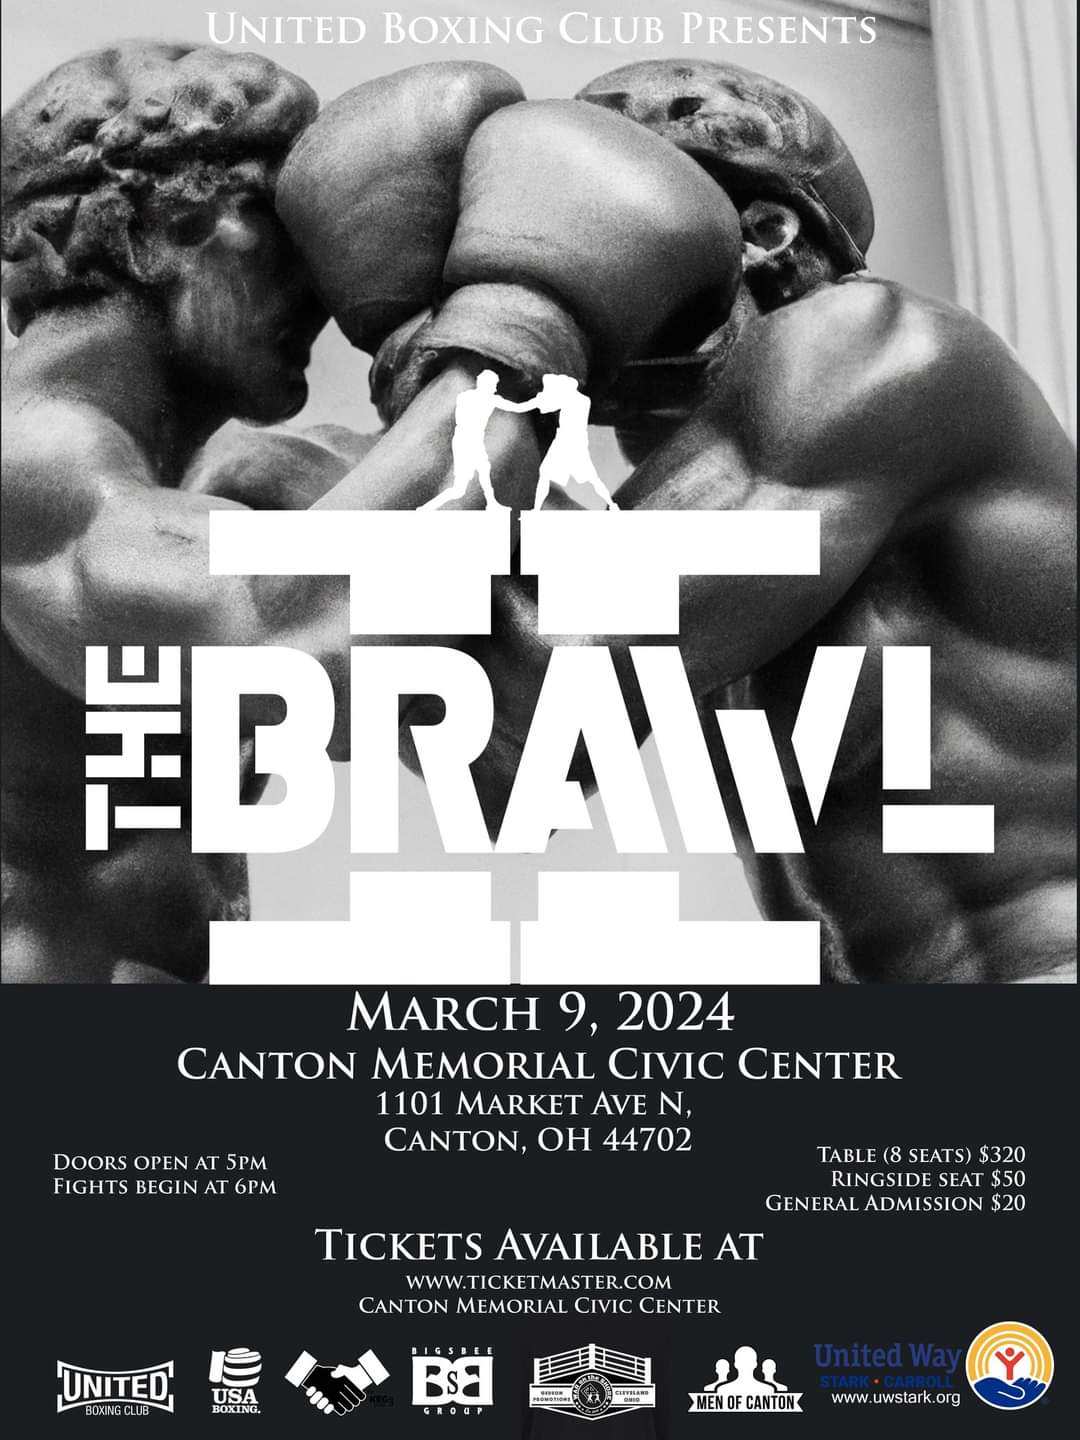 United Boxing Club in Canton will present The Brawl II, an amateur boxing event on March 9 at the Canton Memorial Civic Center. The event is sanctioned by USA Boxing.